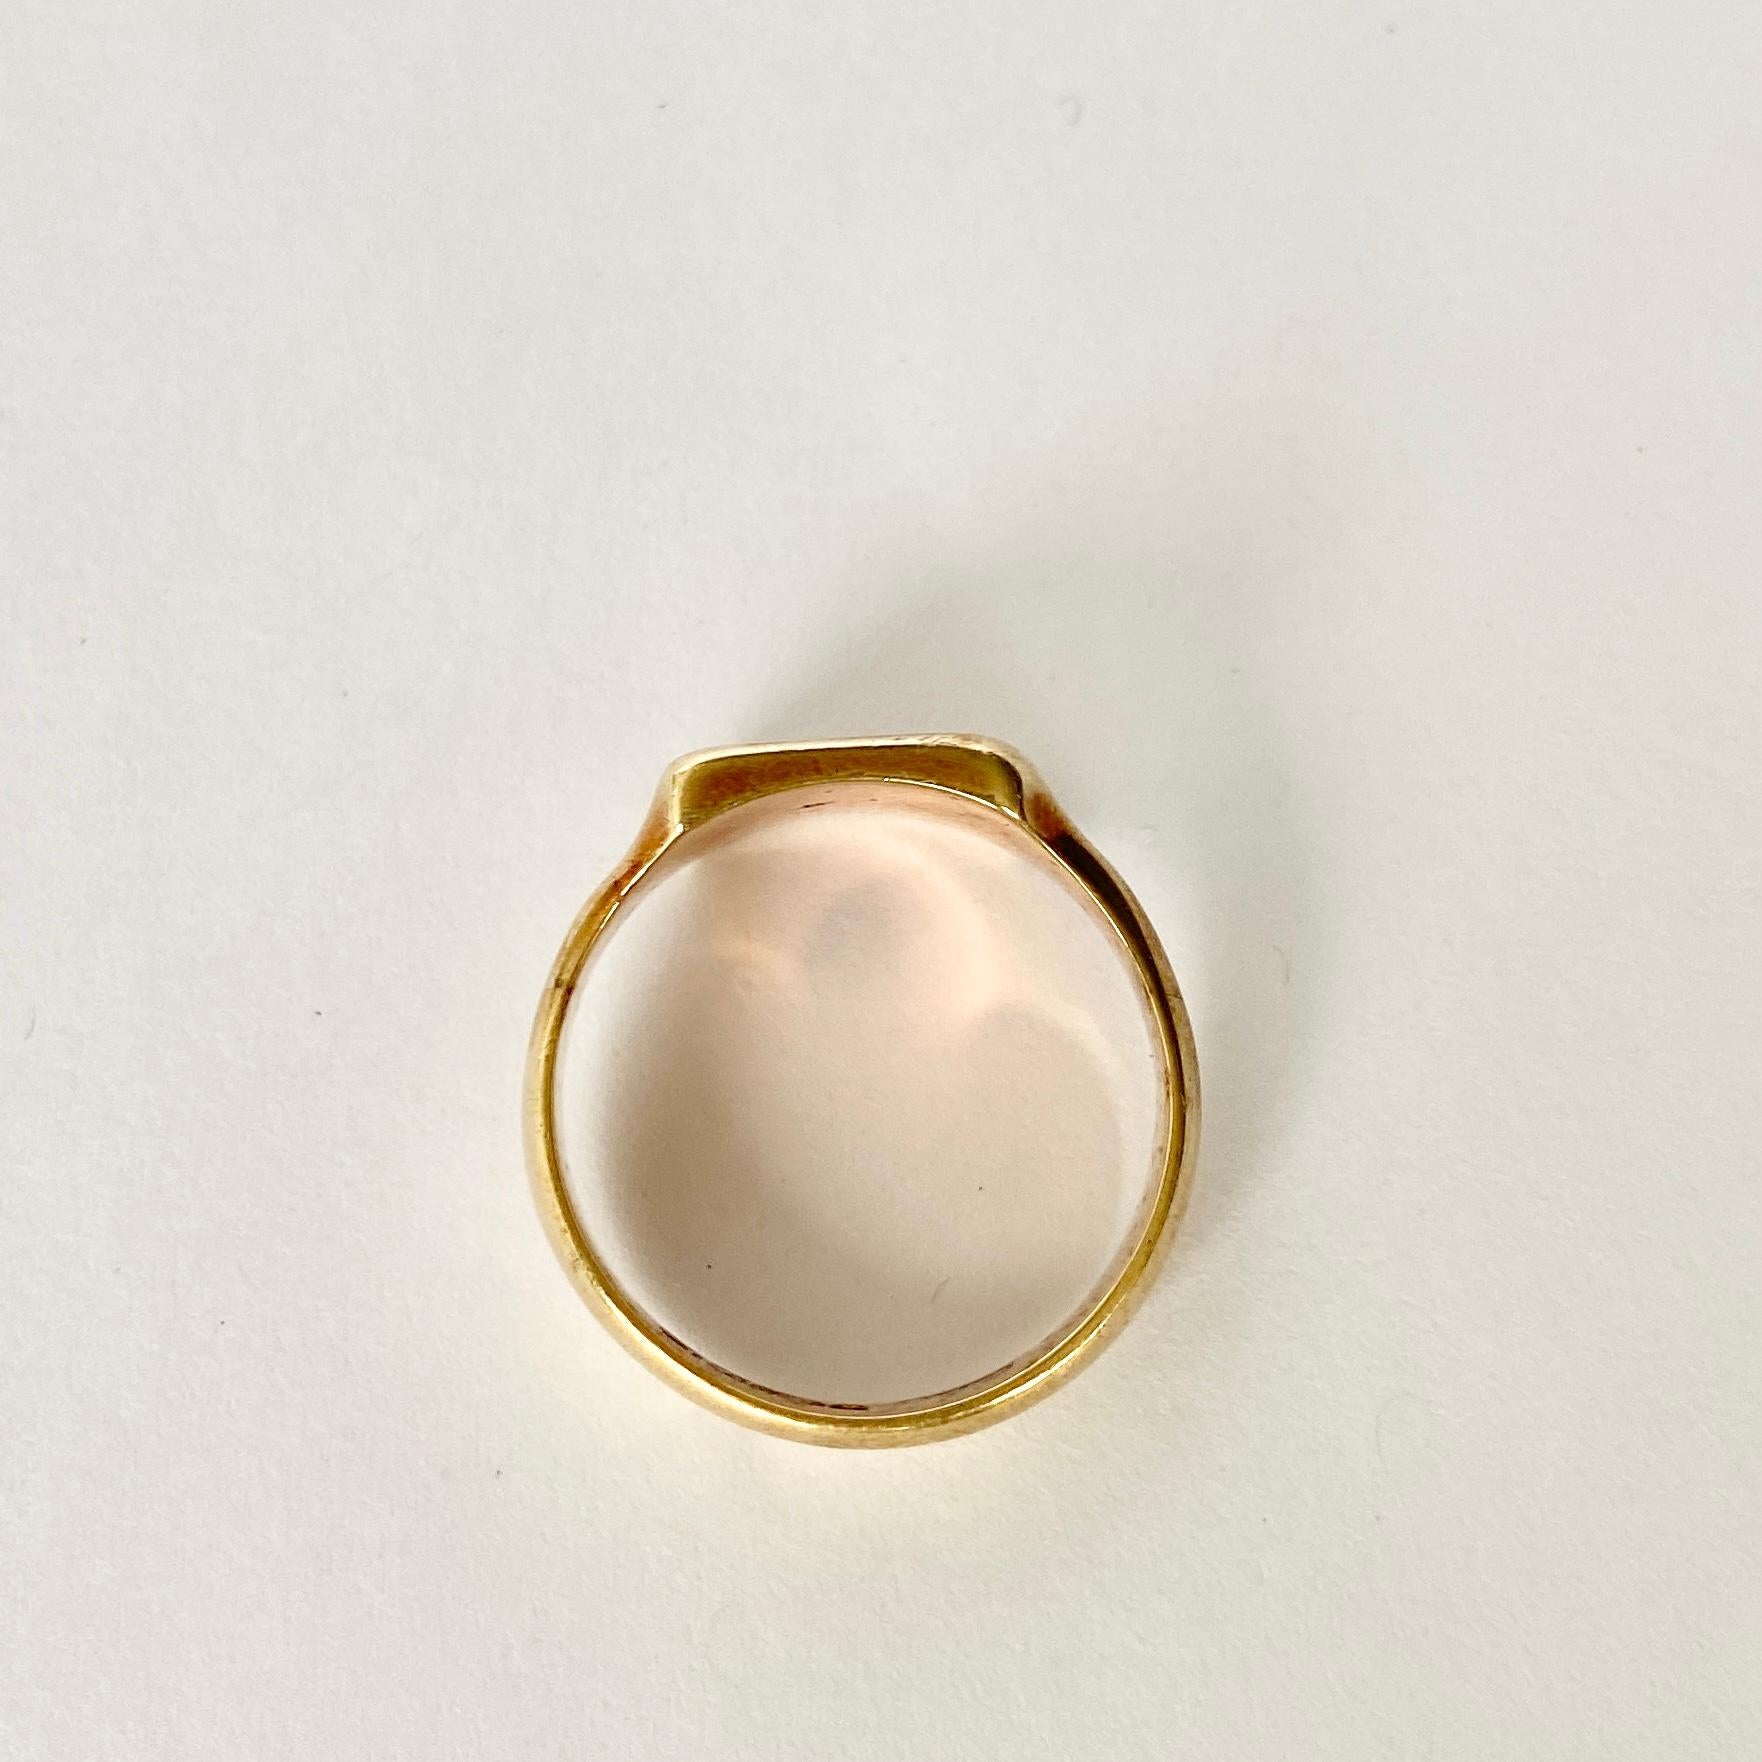 This sweet signet is modelled in 9ct gold and has a face with the initials 'D.H' engraved into it. Fully hallmarked Birmingham 1929.

Ring Size: S 1/2 or 9 1/4 
Face Dimensions: 10x11mm 

Weight: 6.1g